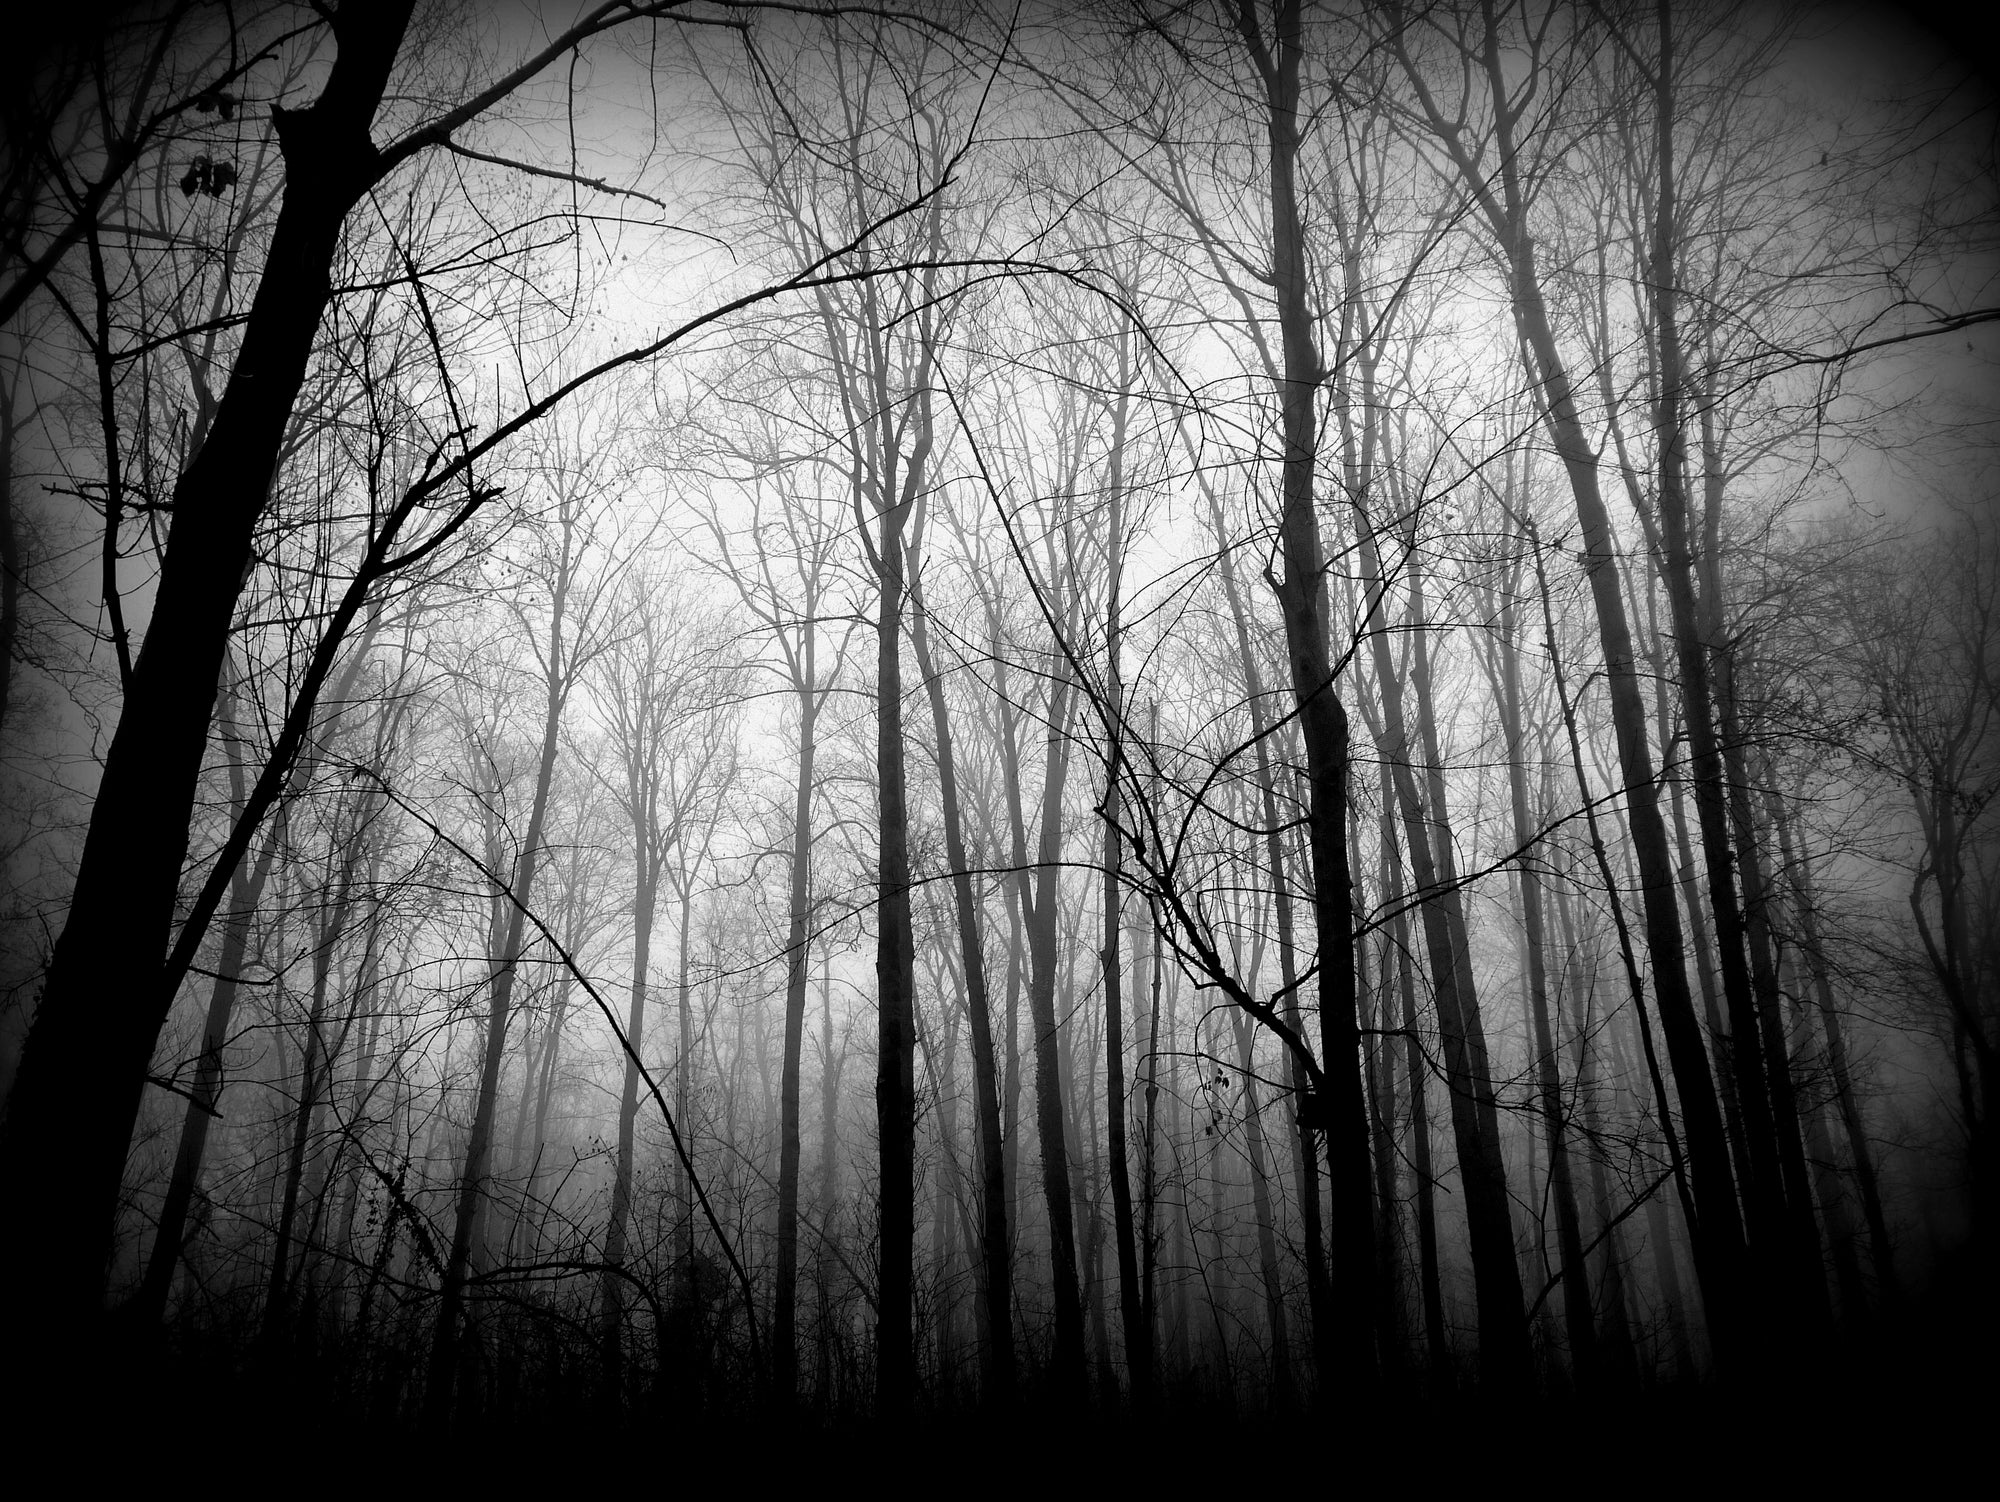 eerie grey image of trees and fog